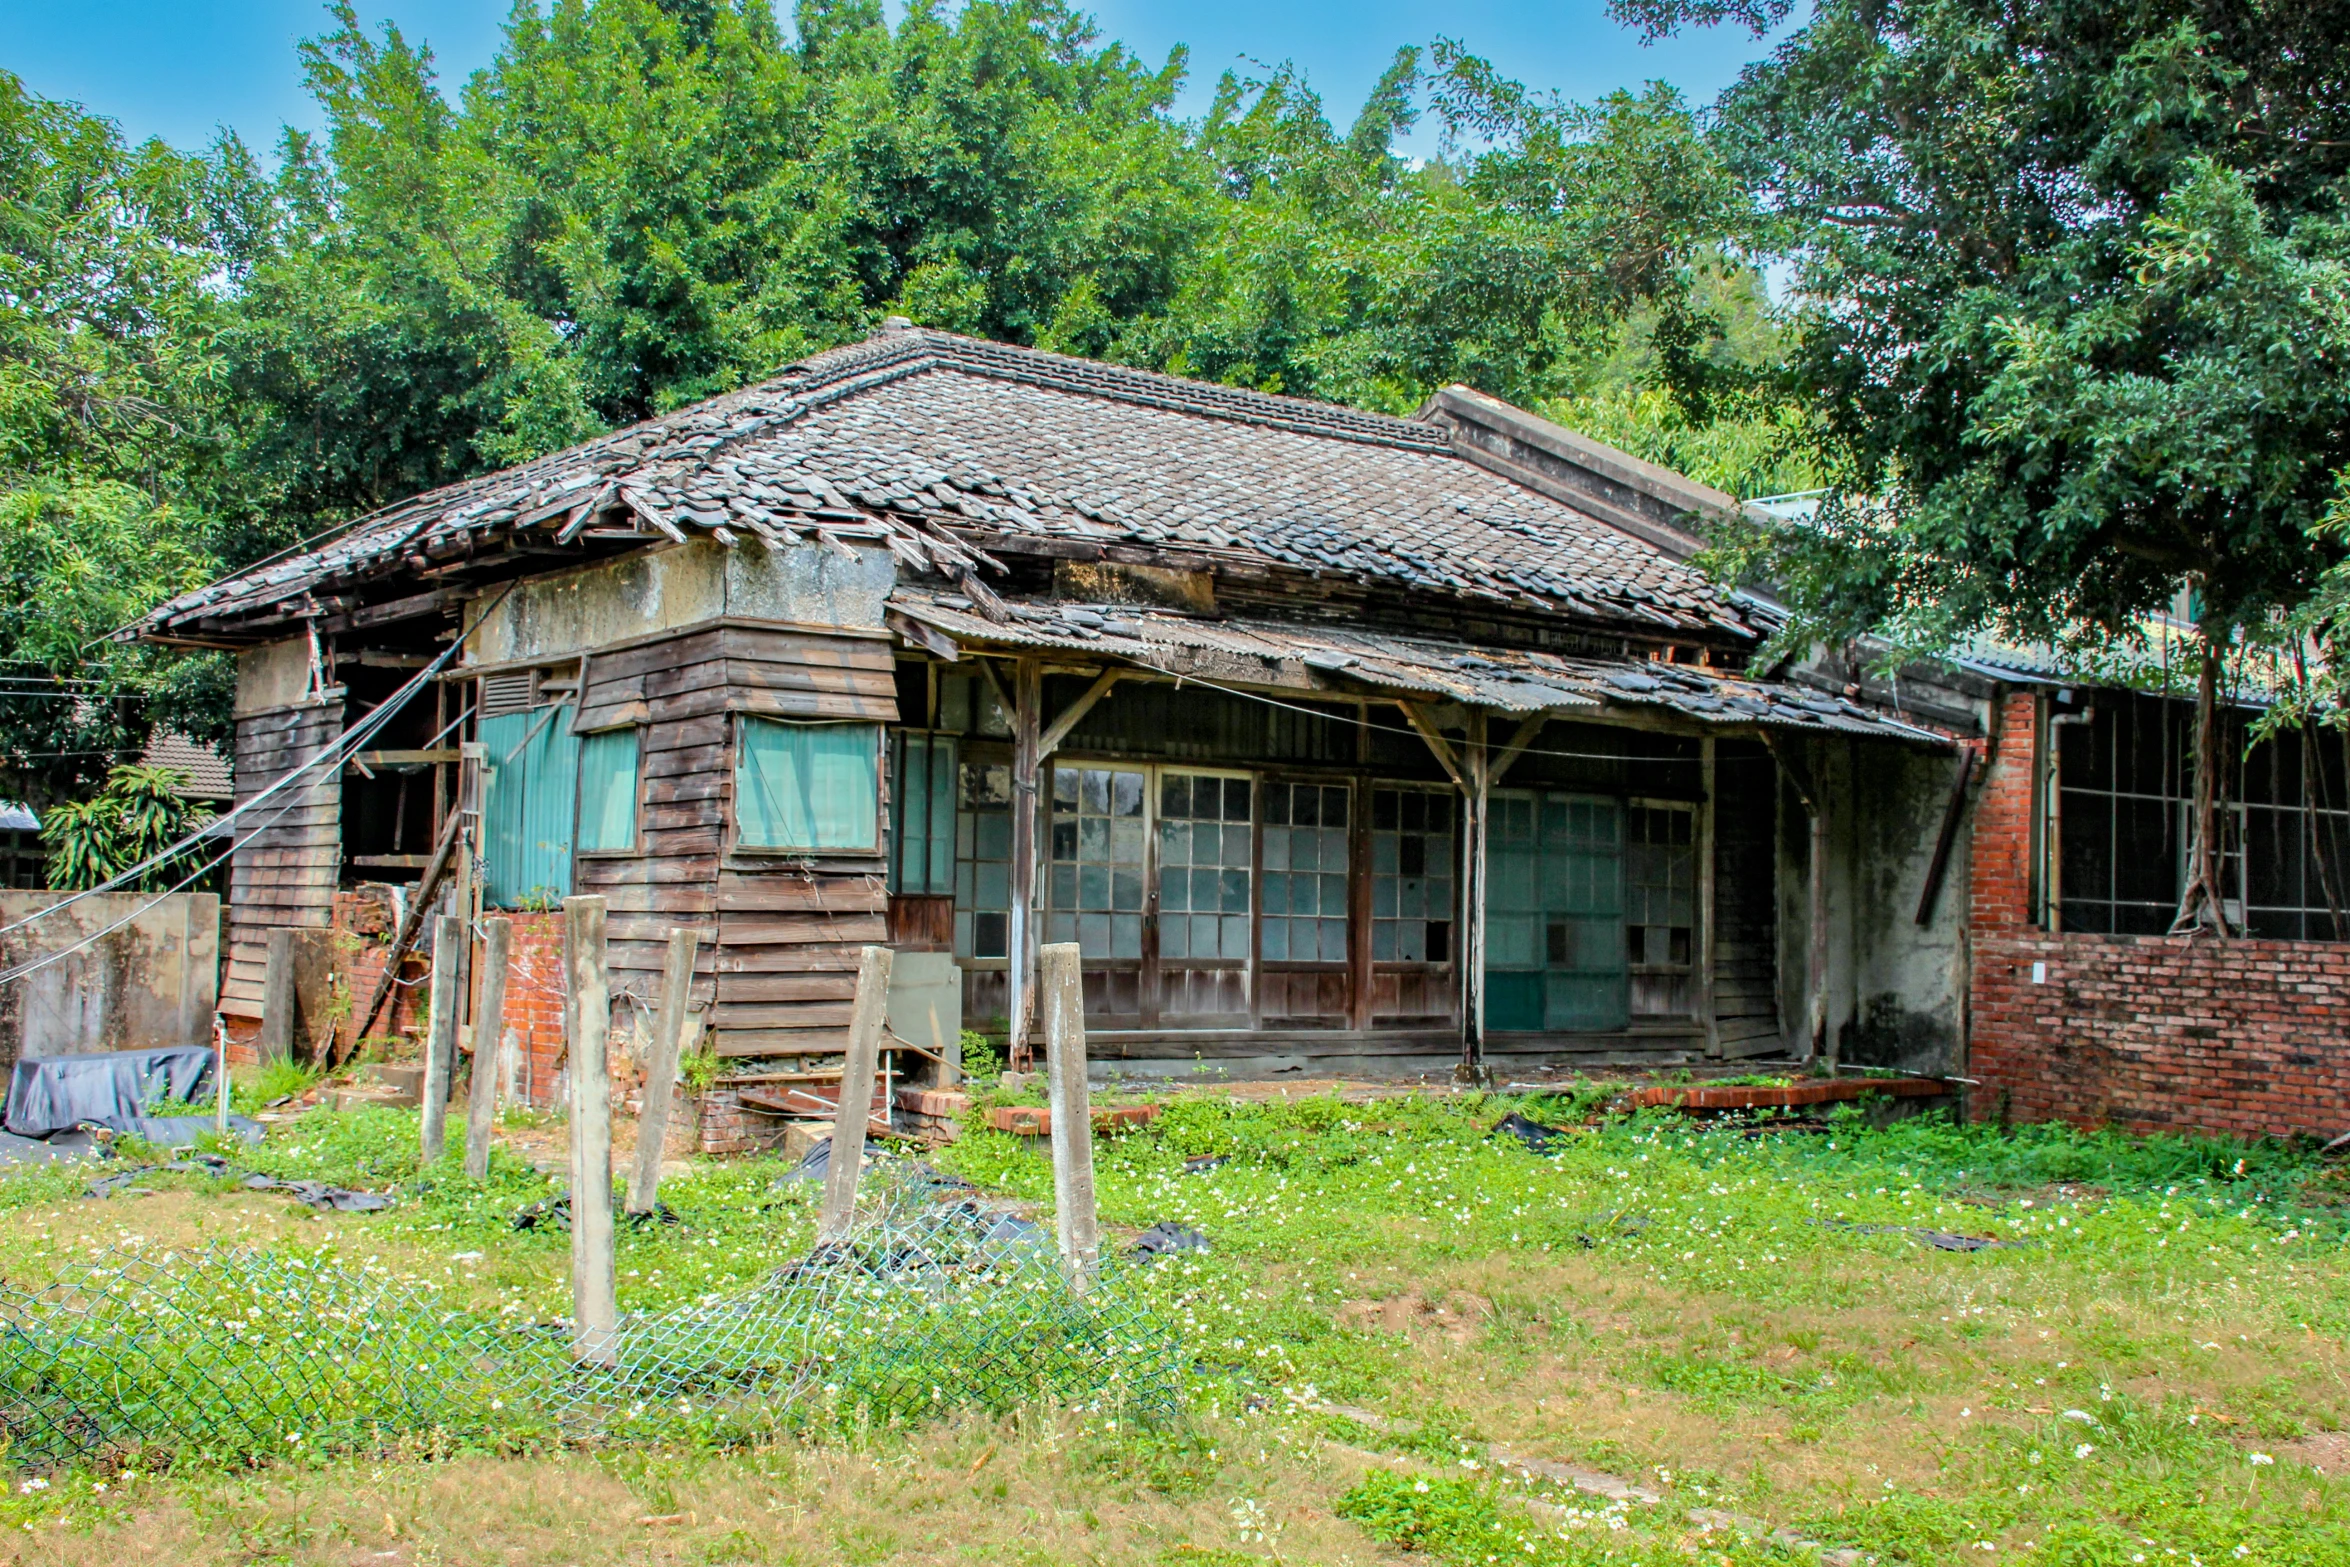 old wooden house with tiled roof near trees